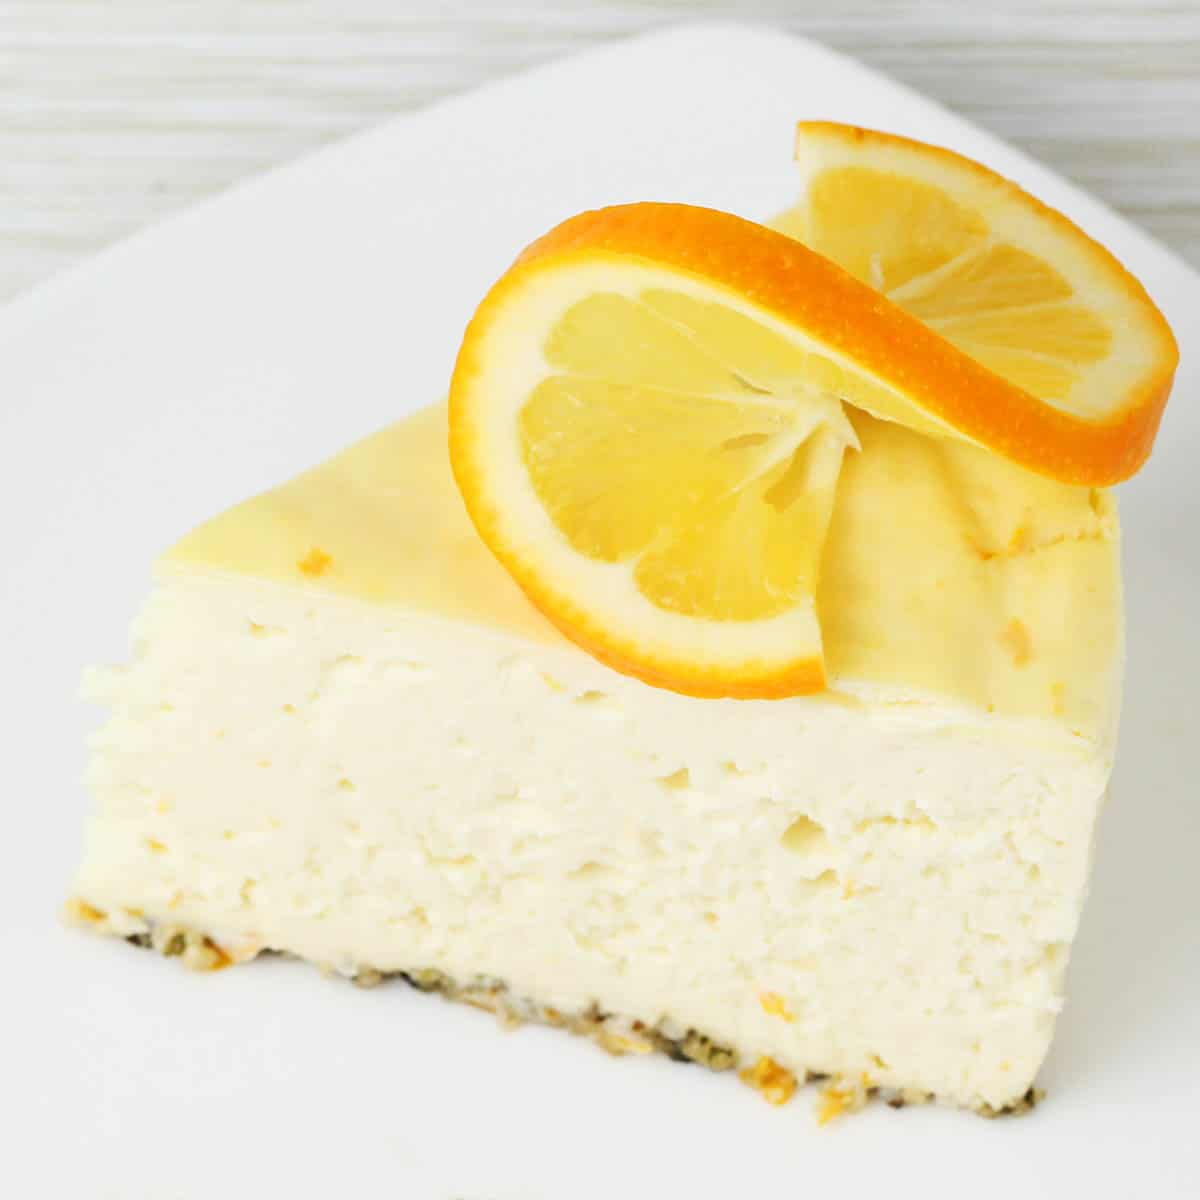 slice of cheesecake with hemp heart crust and a twisted slice of meyer lemon on top, on a white plate